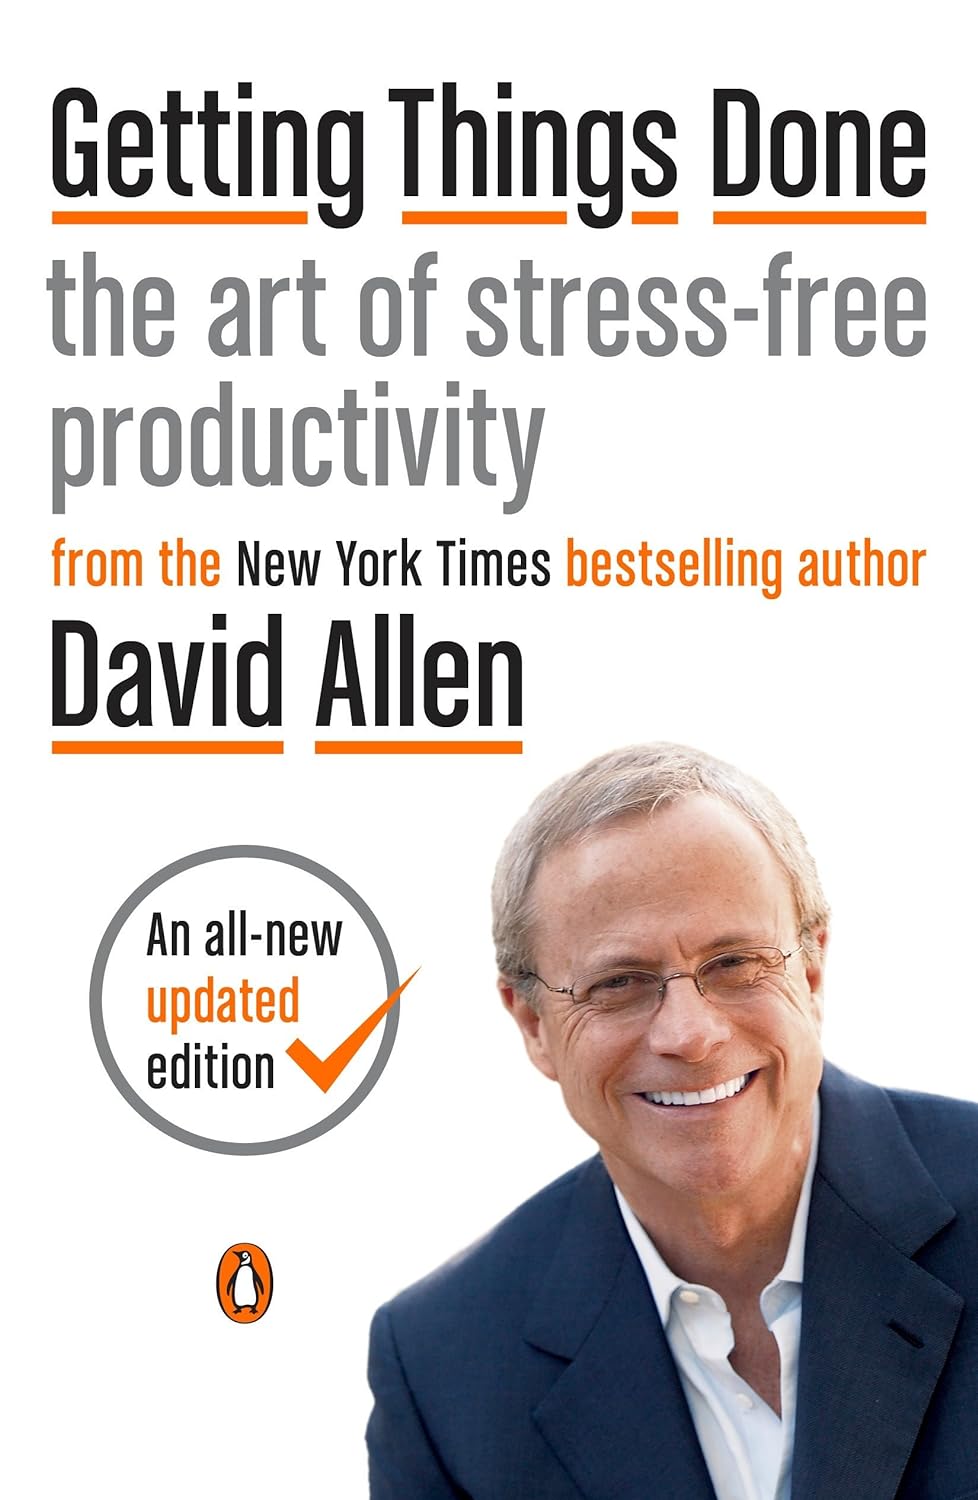 Dvid Allen - Getting Things Done. The Art of Stress-Free Productivity